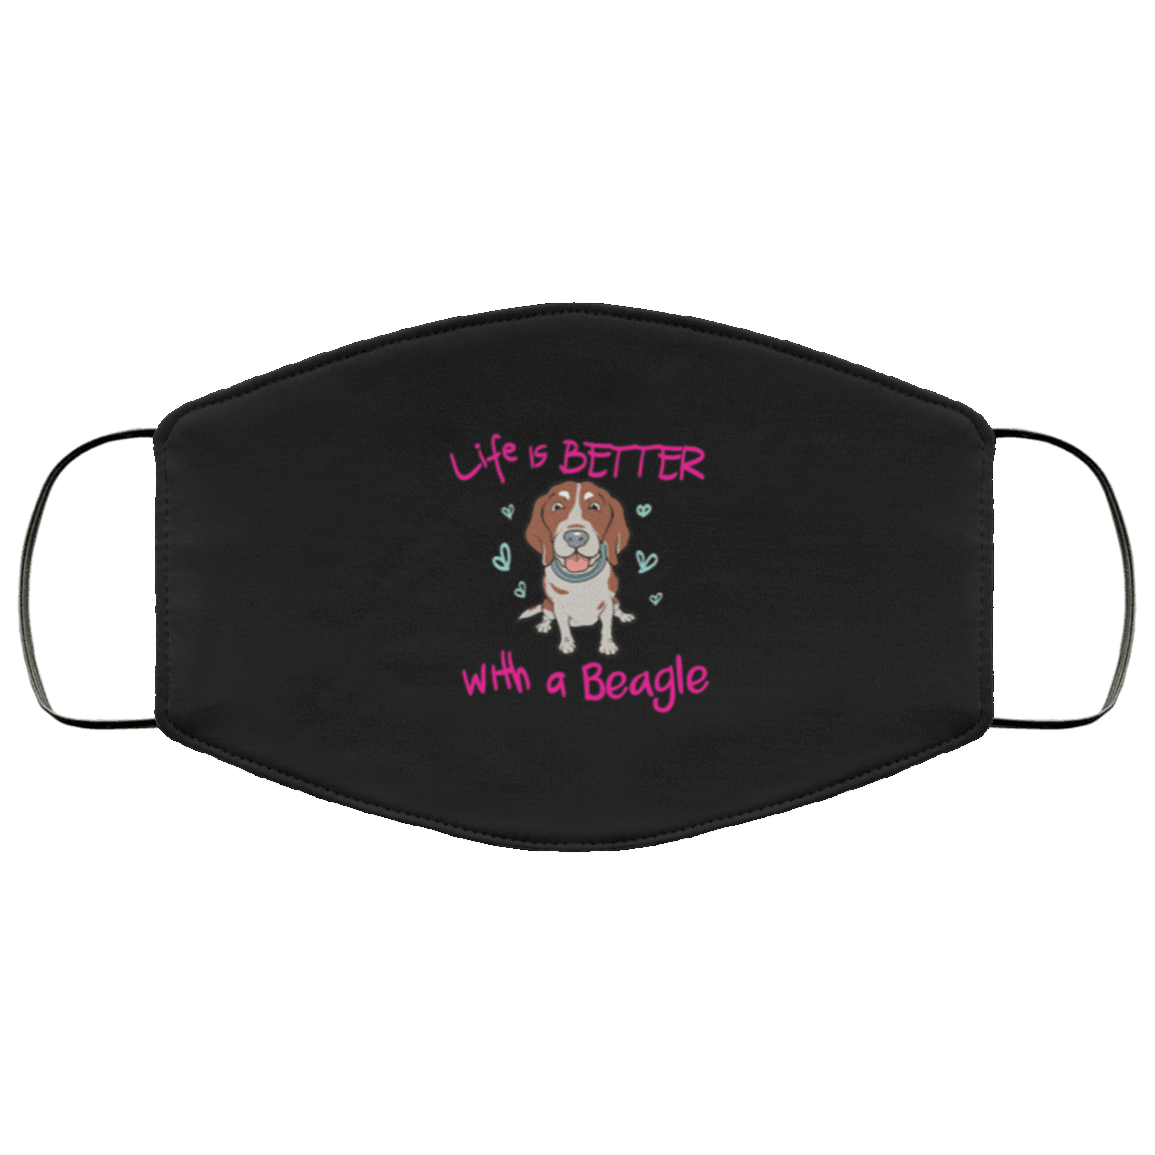 Designs by MyUtopia Shout Out:Life Is Better with a Beagle Adult Fabric Face Mask with Elastic Ear Loops,3 Layer Fabric Face Mask / Black / Adult,Fabric Face Mask